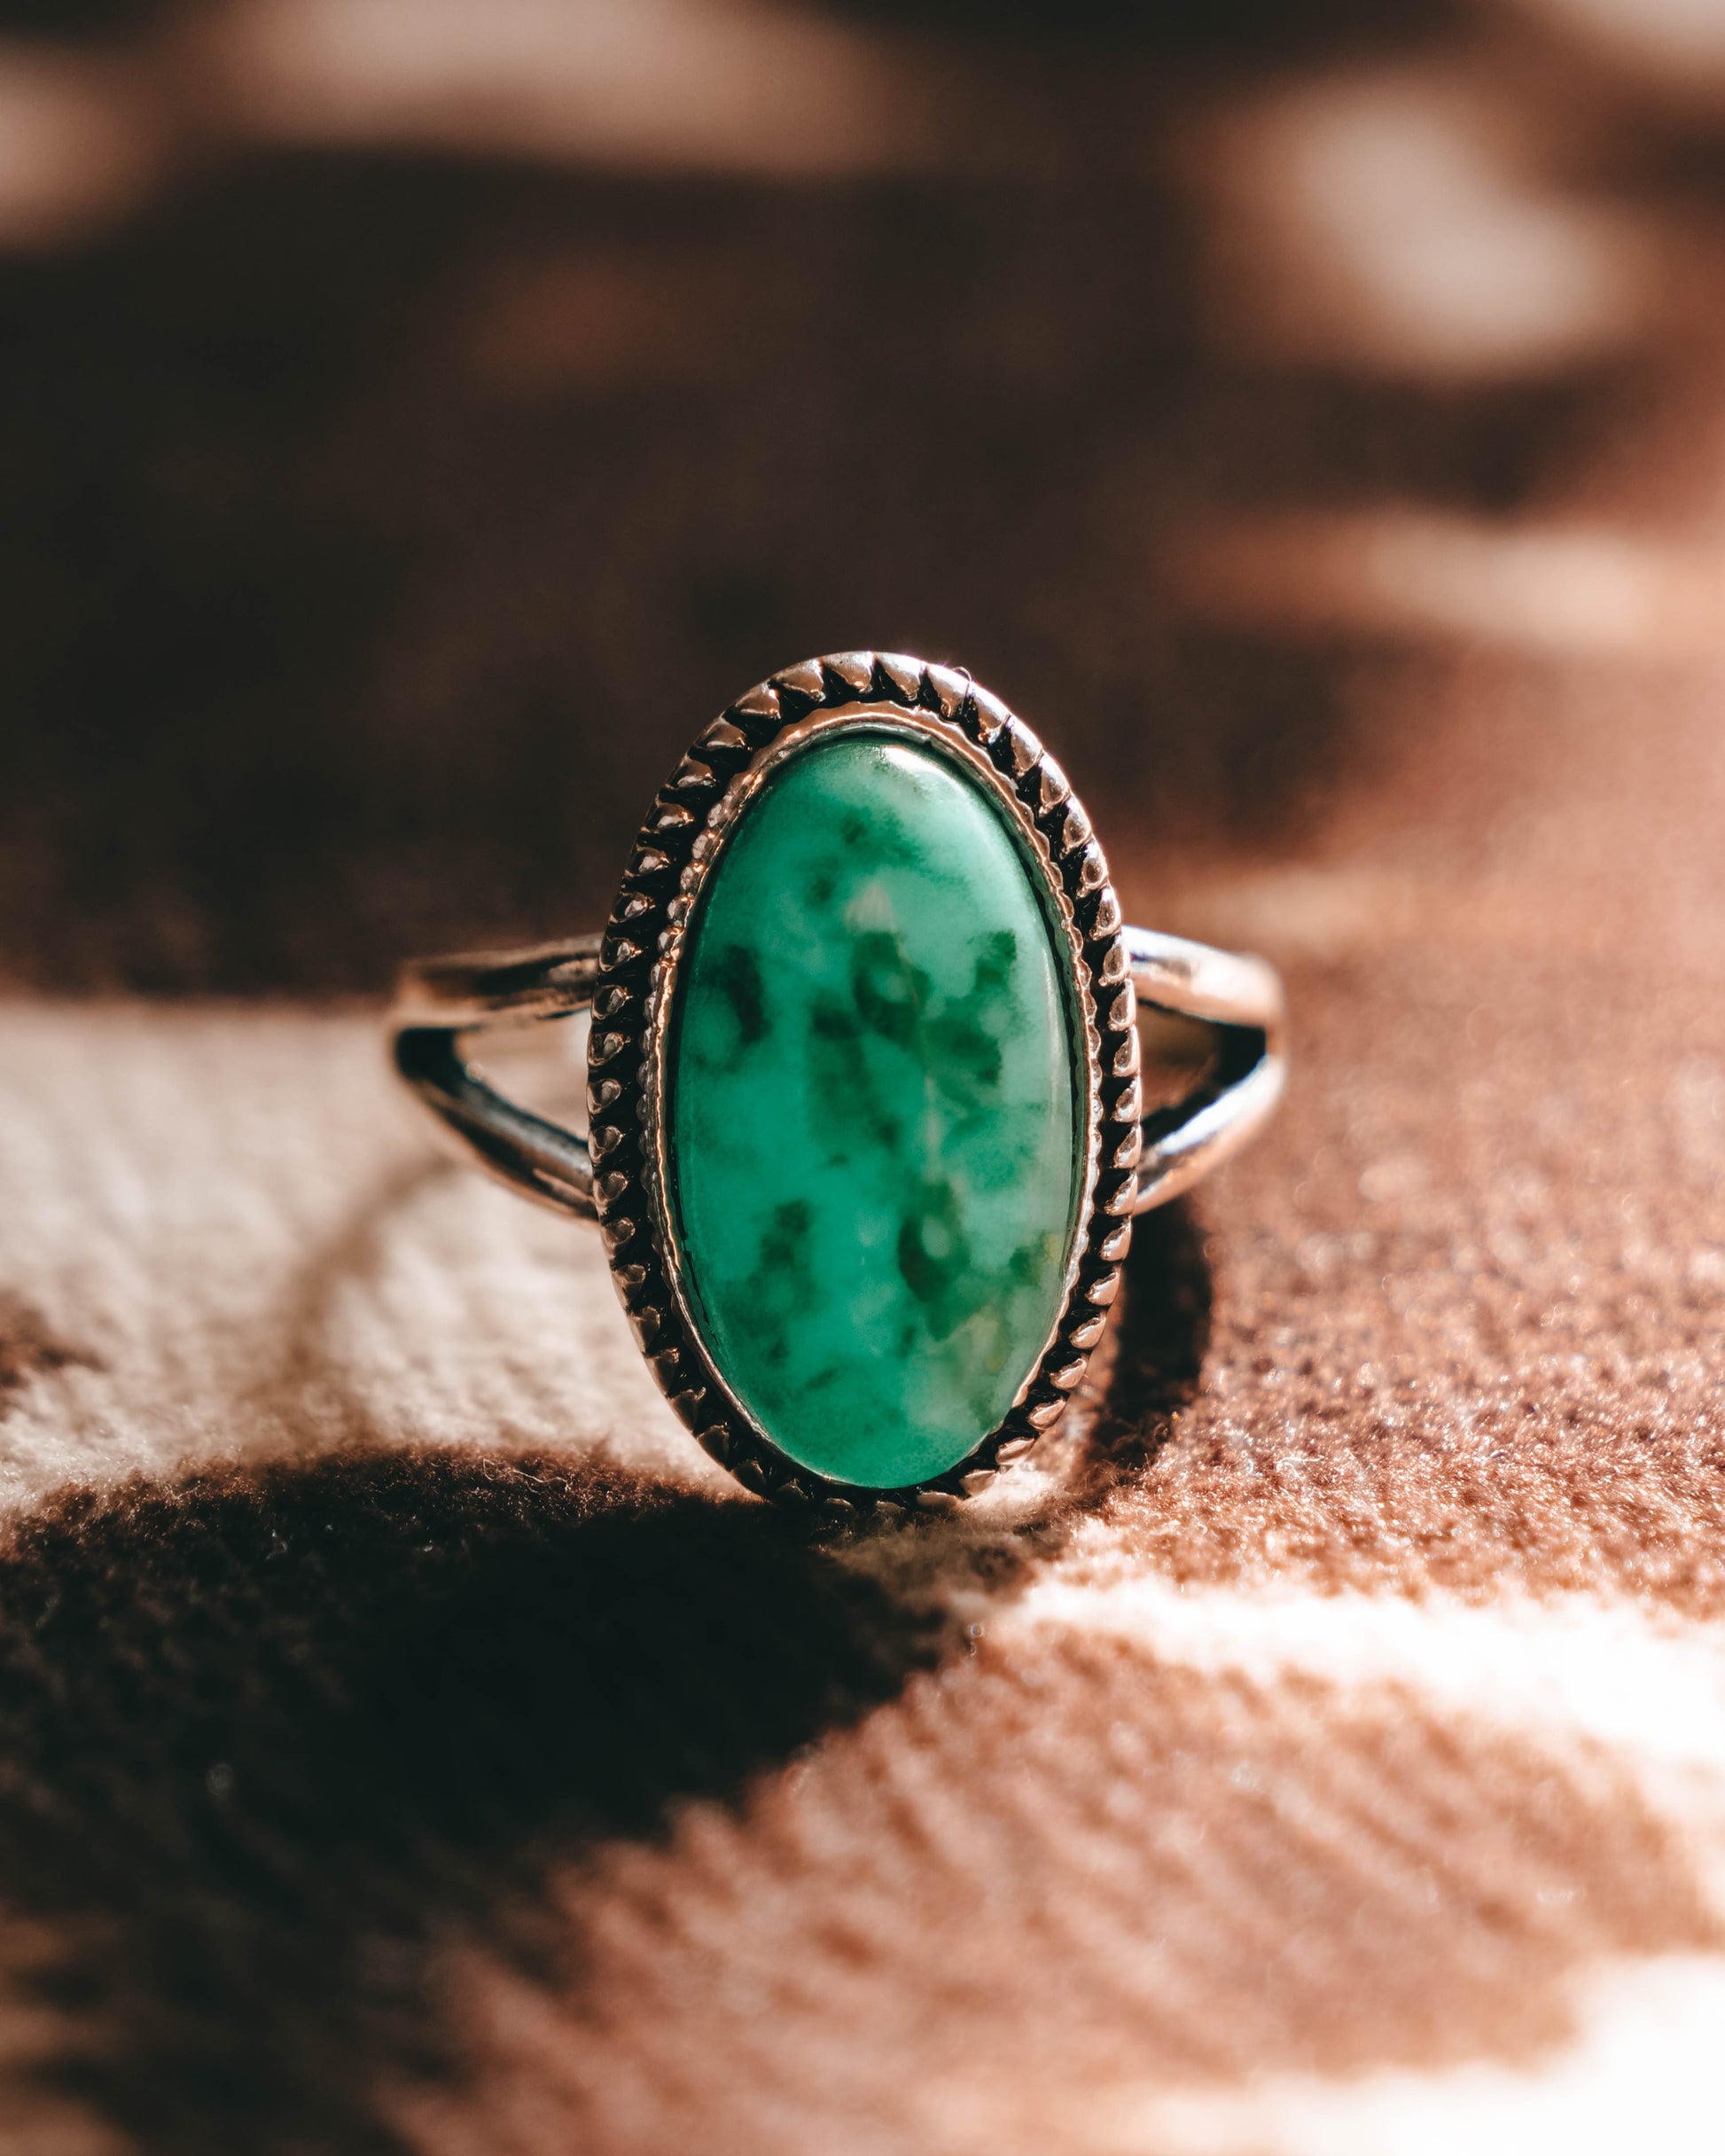 Turquoise oval western-style jewelry- This gorgeous cowgirl-style ring has a turquoise colored gem-stone.